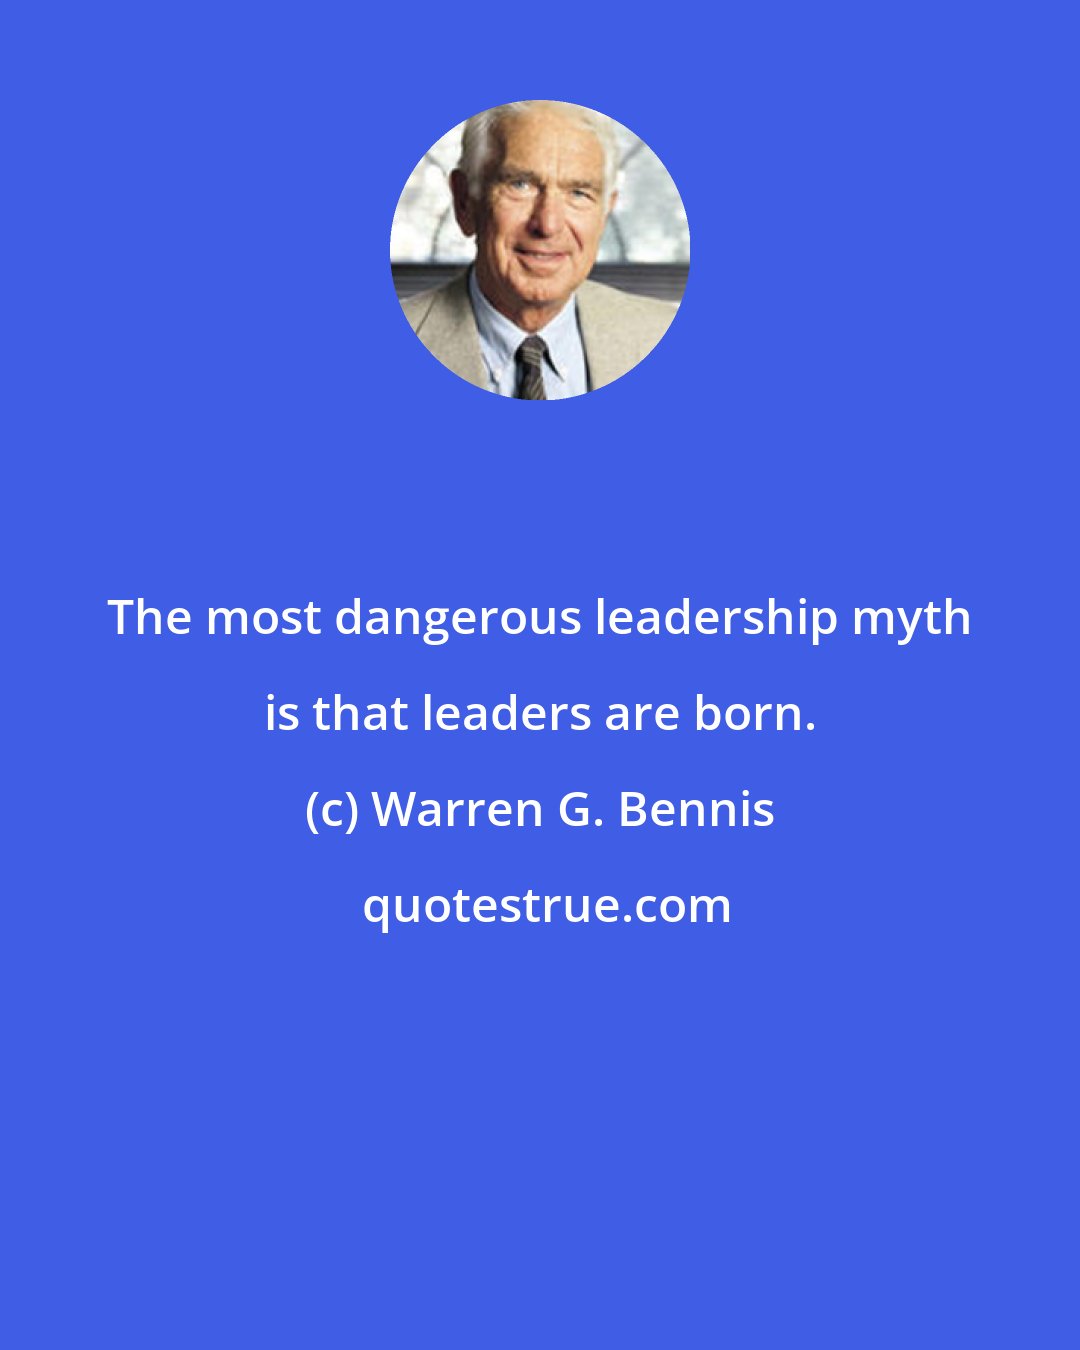 Warren G. Bennis: The most dangerous leadership myth is that leaders are born.